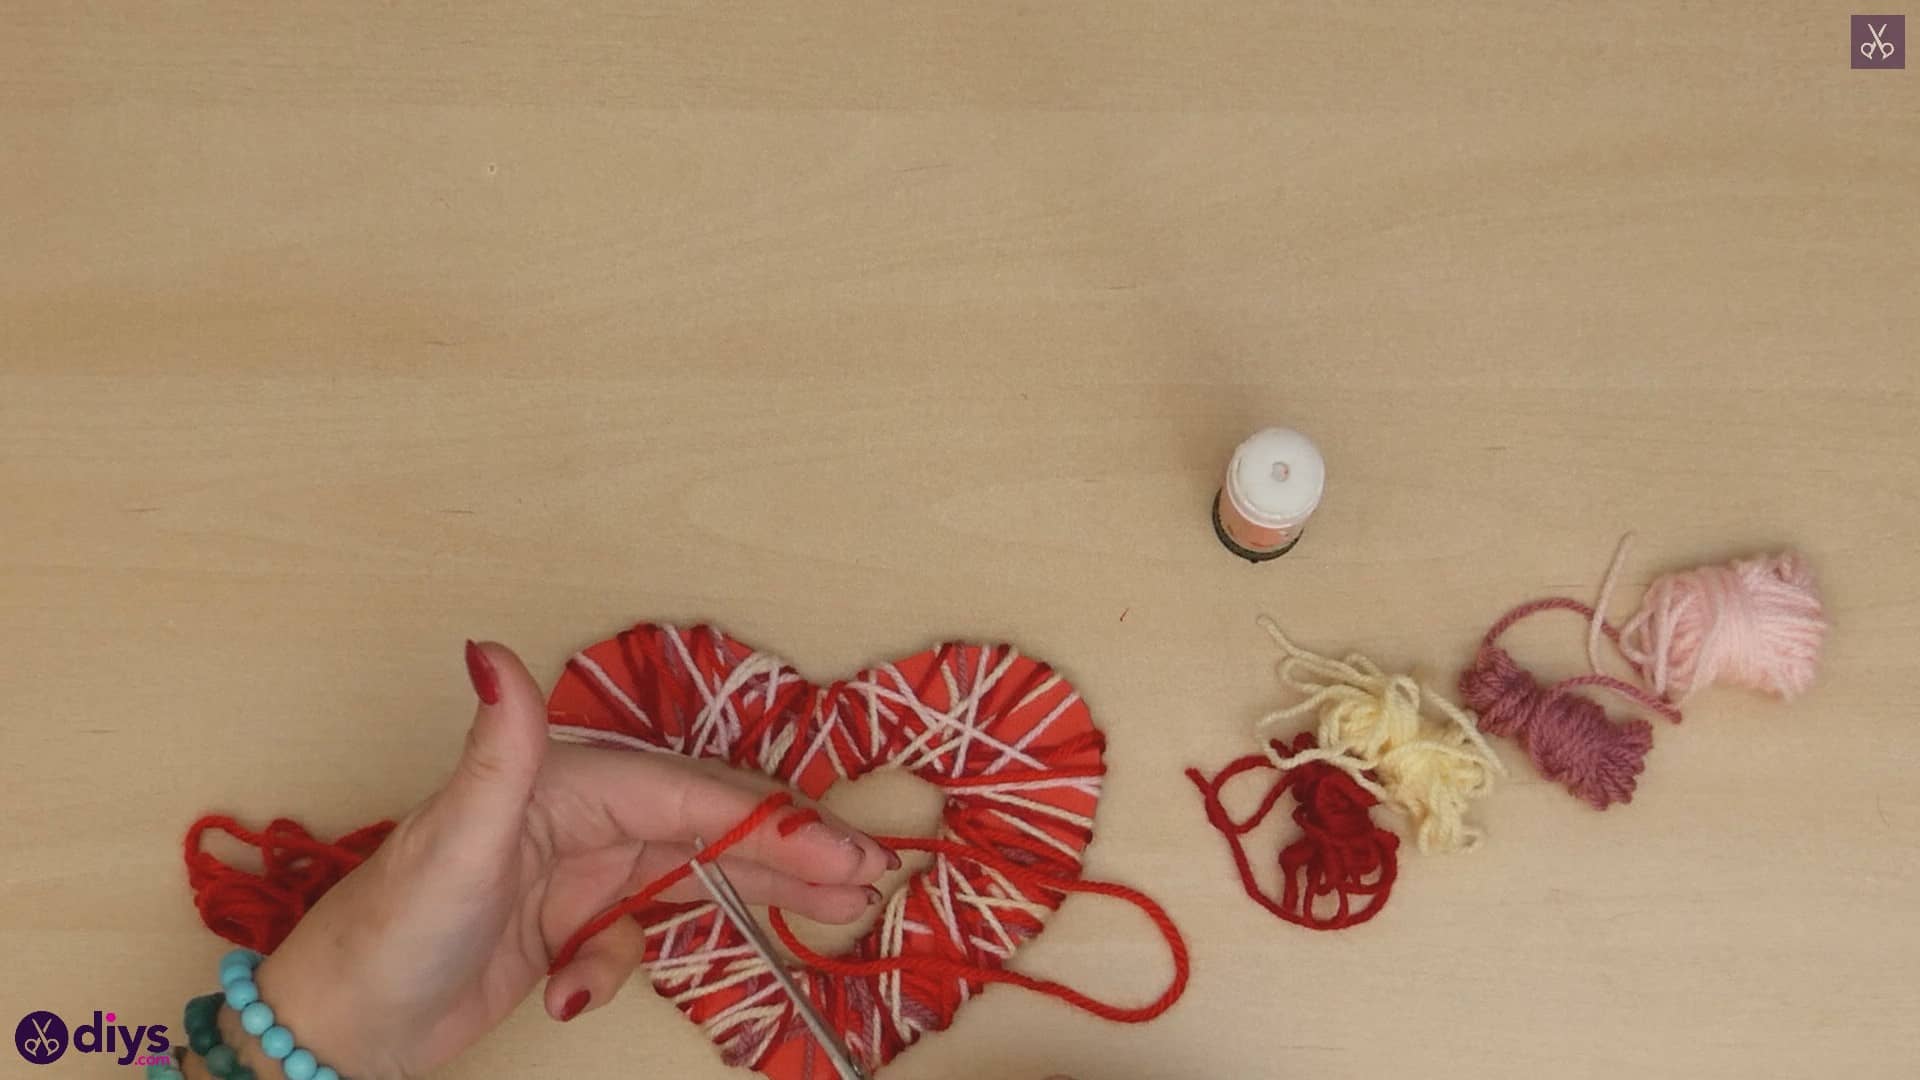 Diy yarn wrapped paper heart step 7